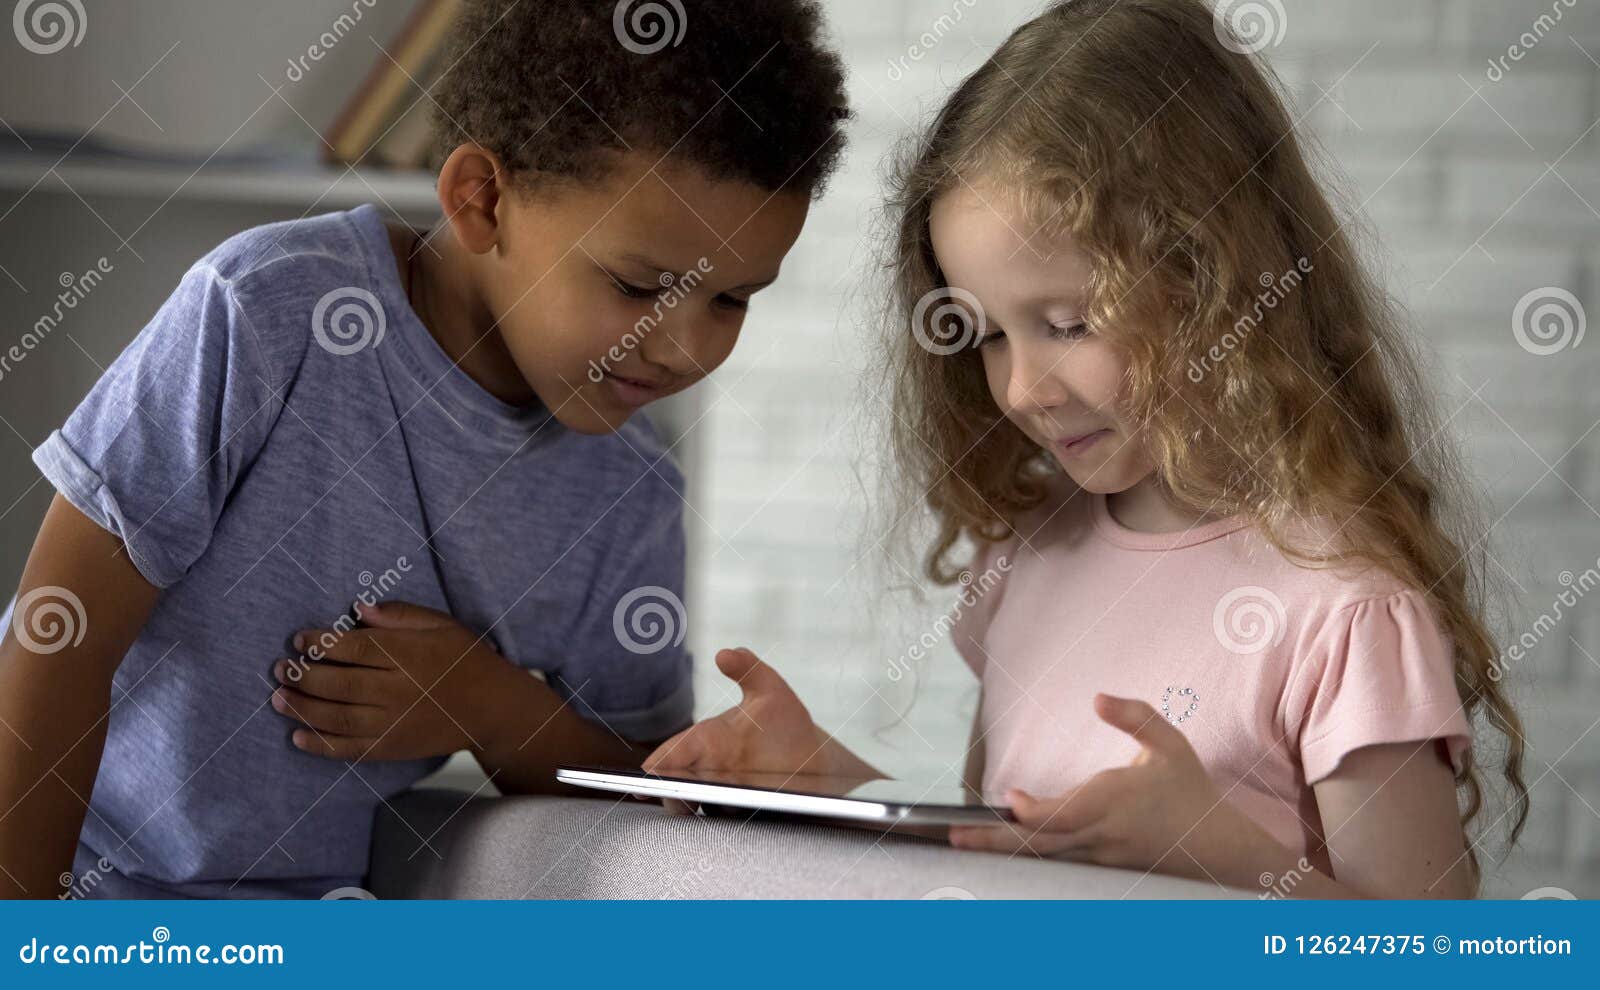 little boy and girl watching movie on tablet at kindergarten, early development